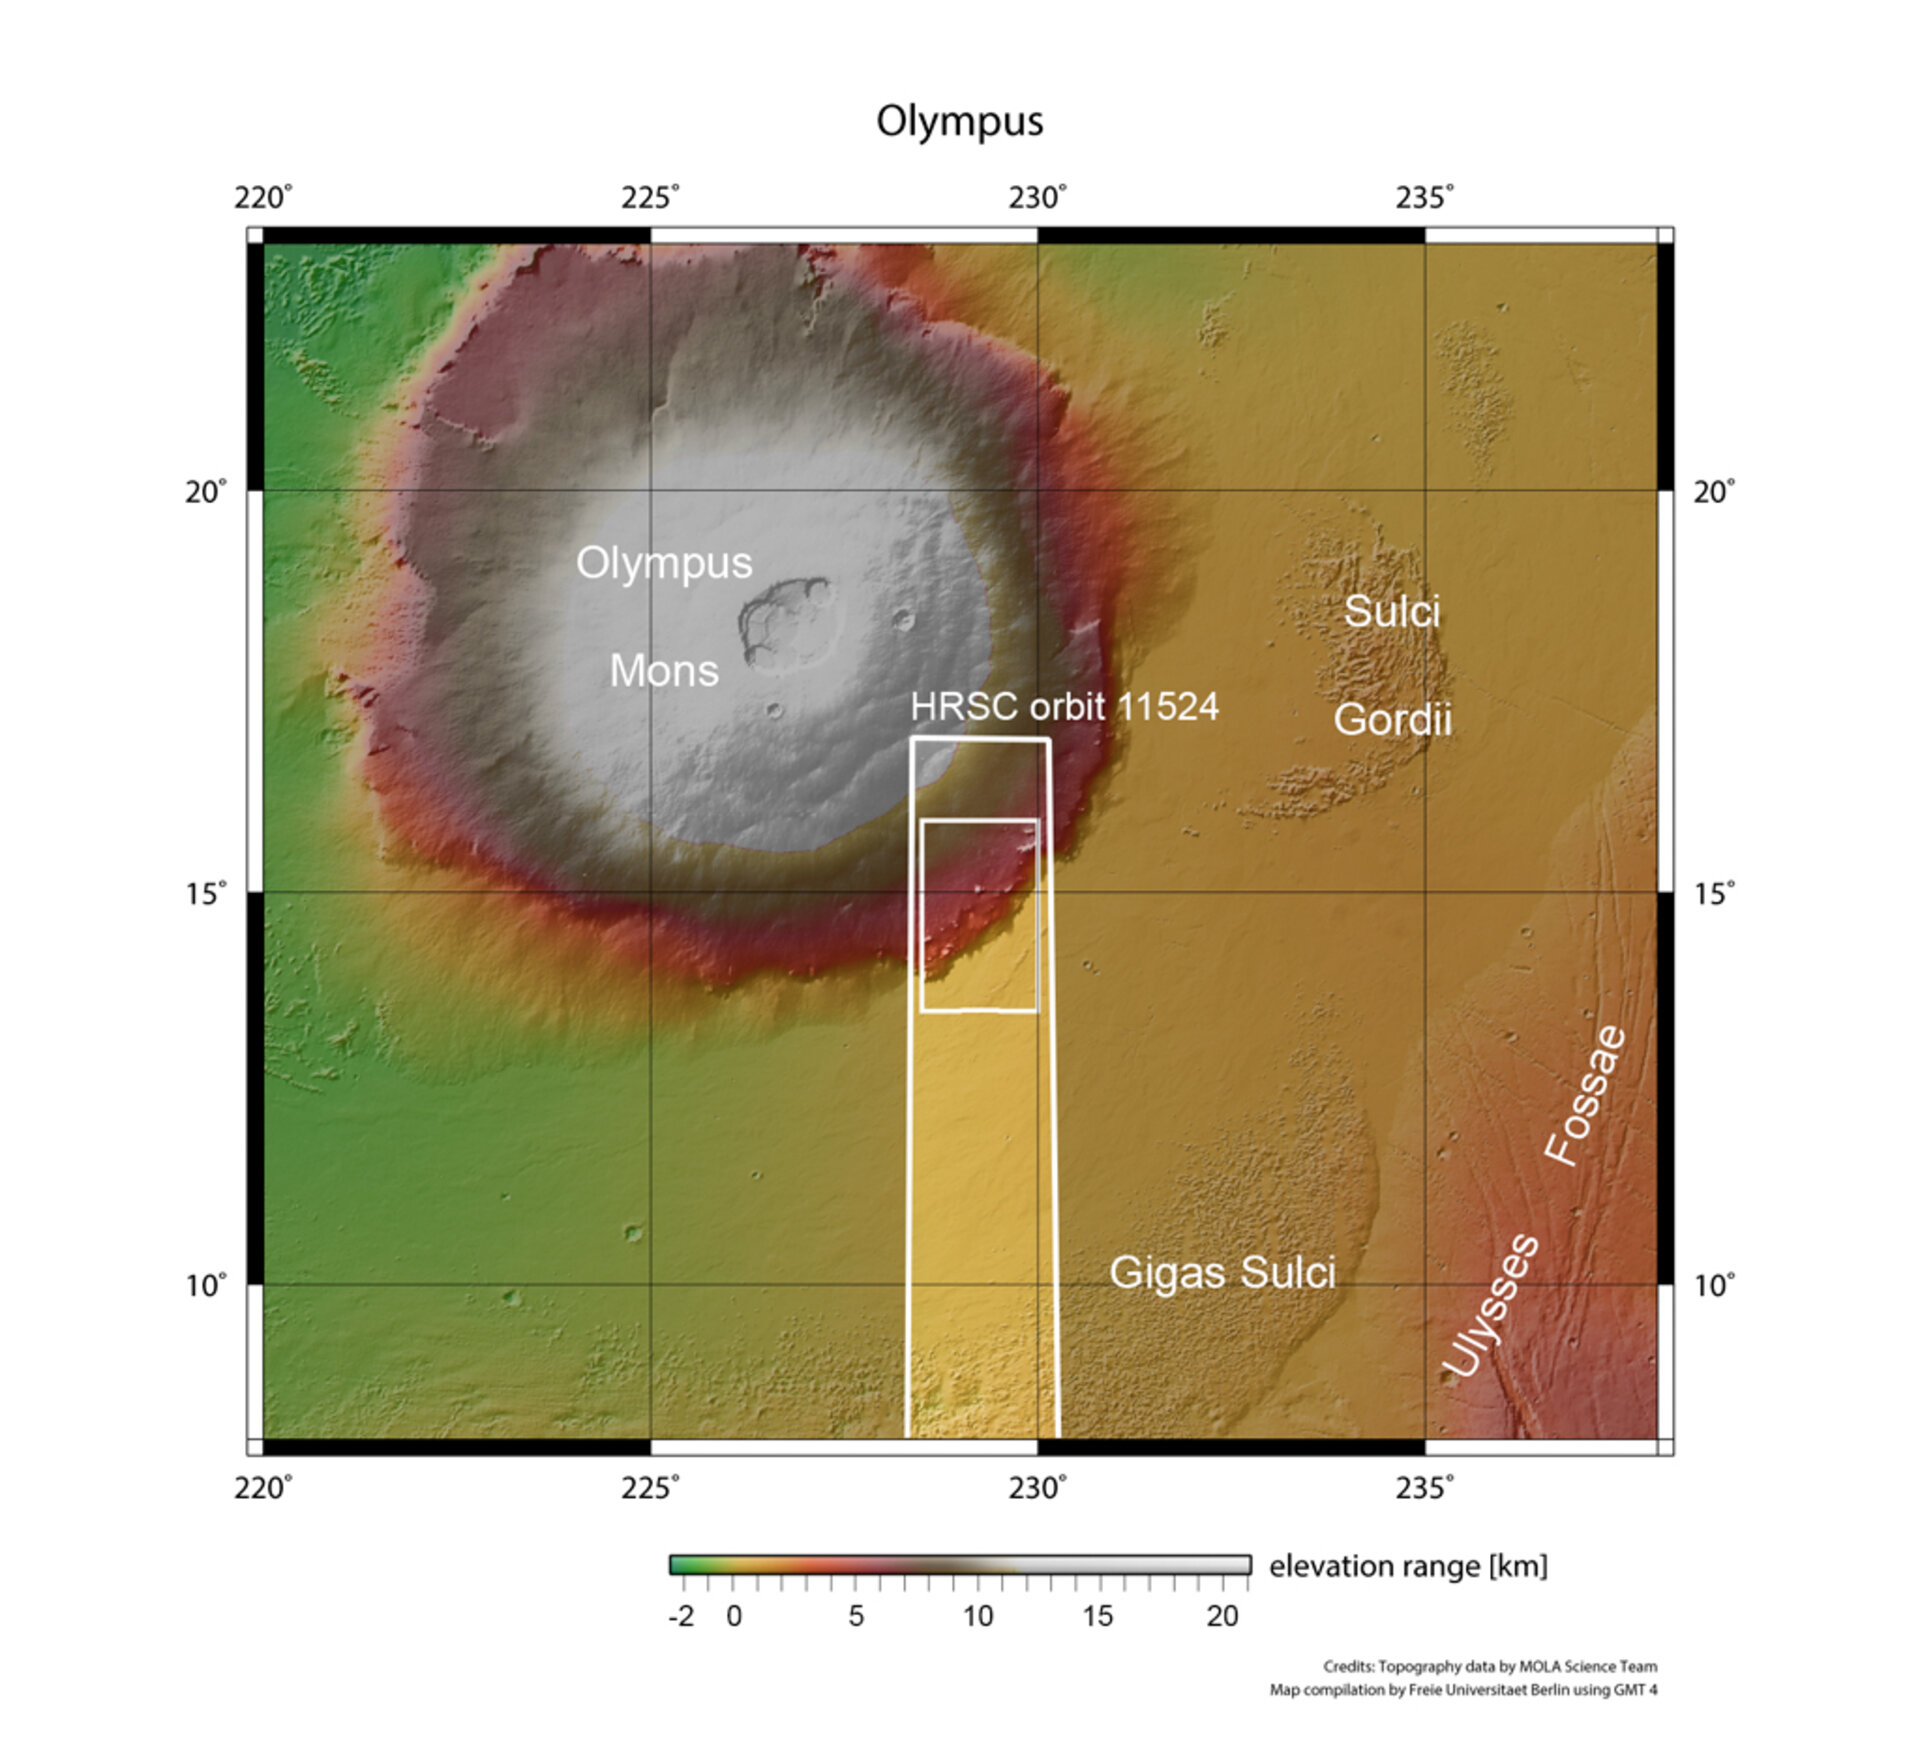 Olympus Mons in context